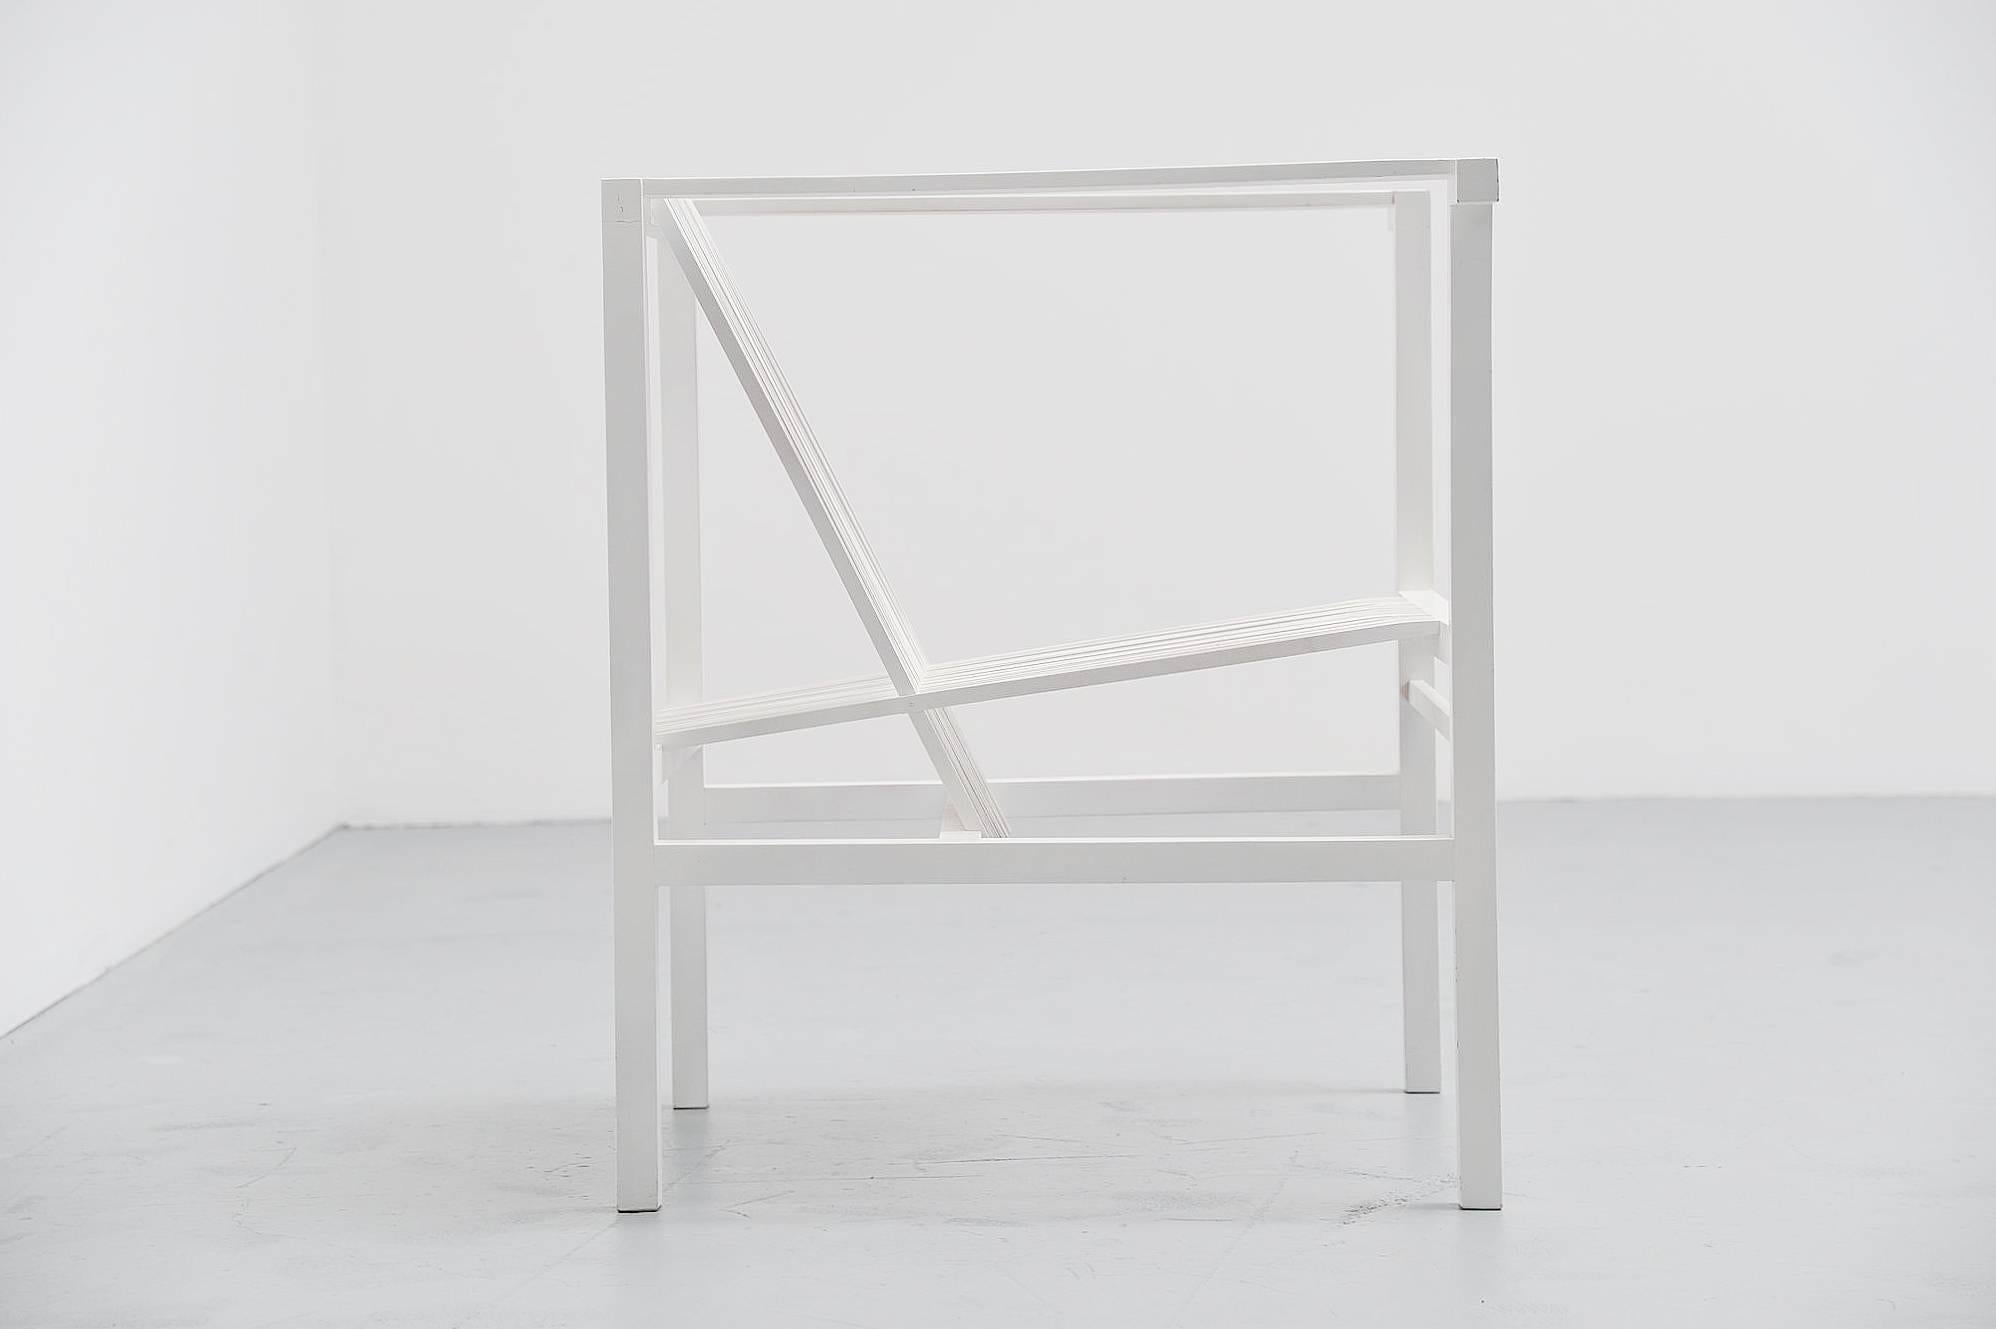 Rare high slat armchair designed by Ruud Jan Kokke, produced by Metaform 1984. This chair was produced by Metaform for 17 years, and only on request because the production was too costly. This is for a very nice white lacquered example. This chair